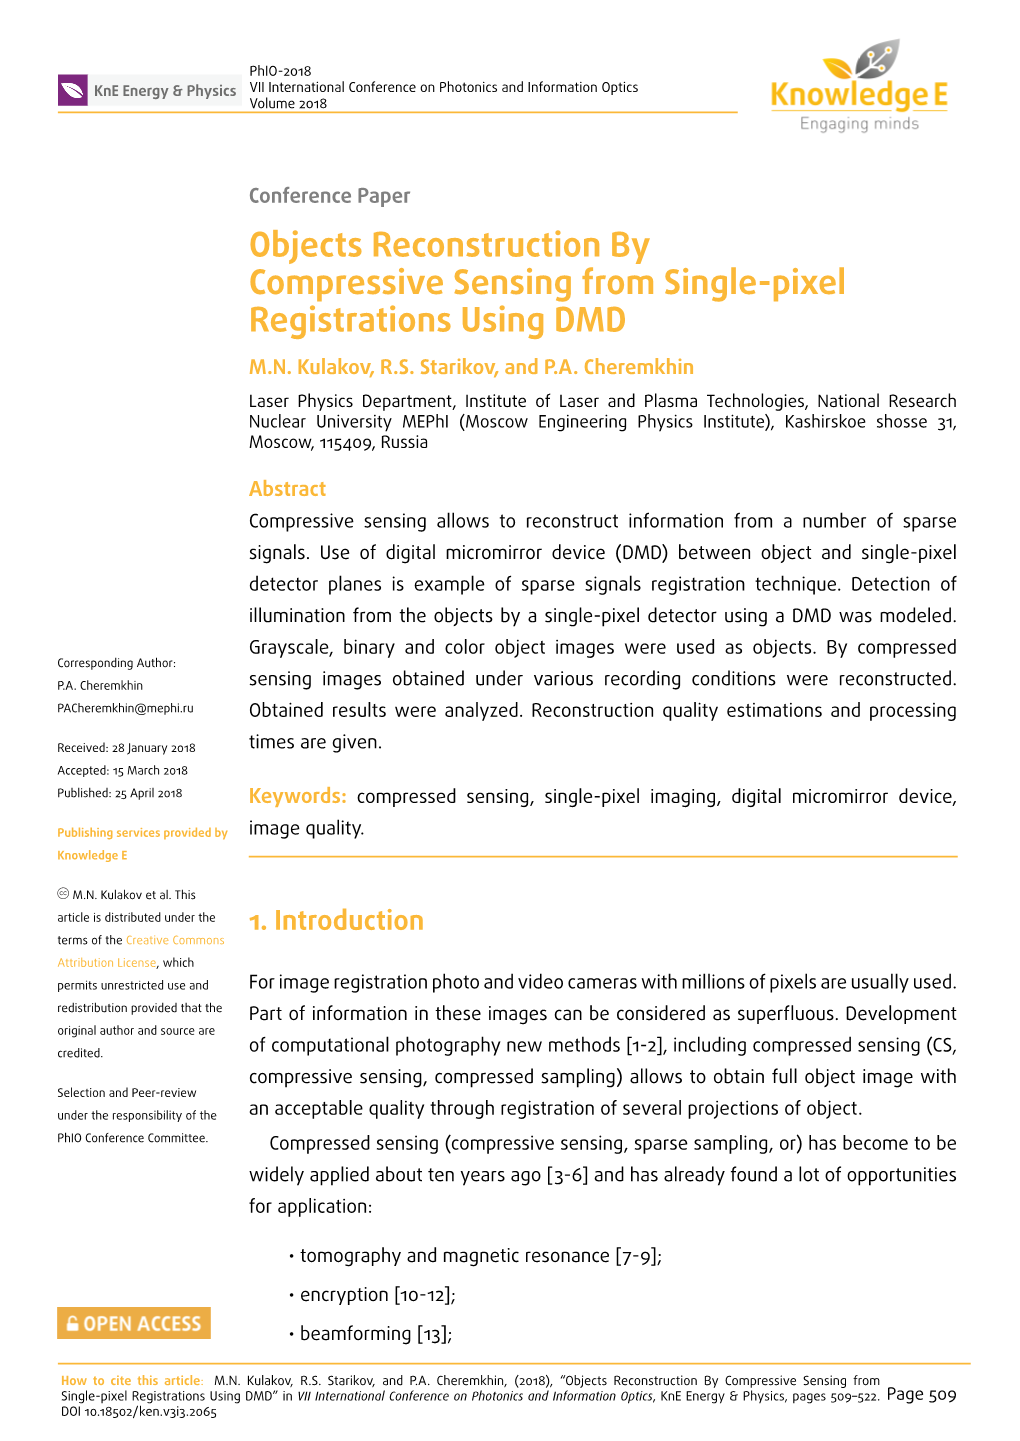 Objects Reconstruction by Compressive Sensing from Single-Pixel Registrations Using DMD M.N